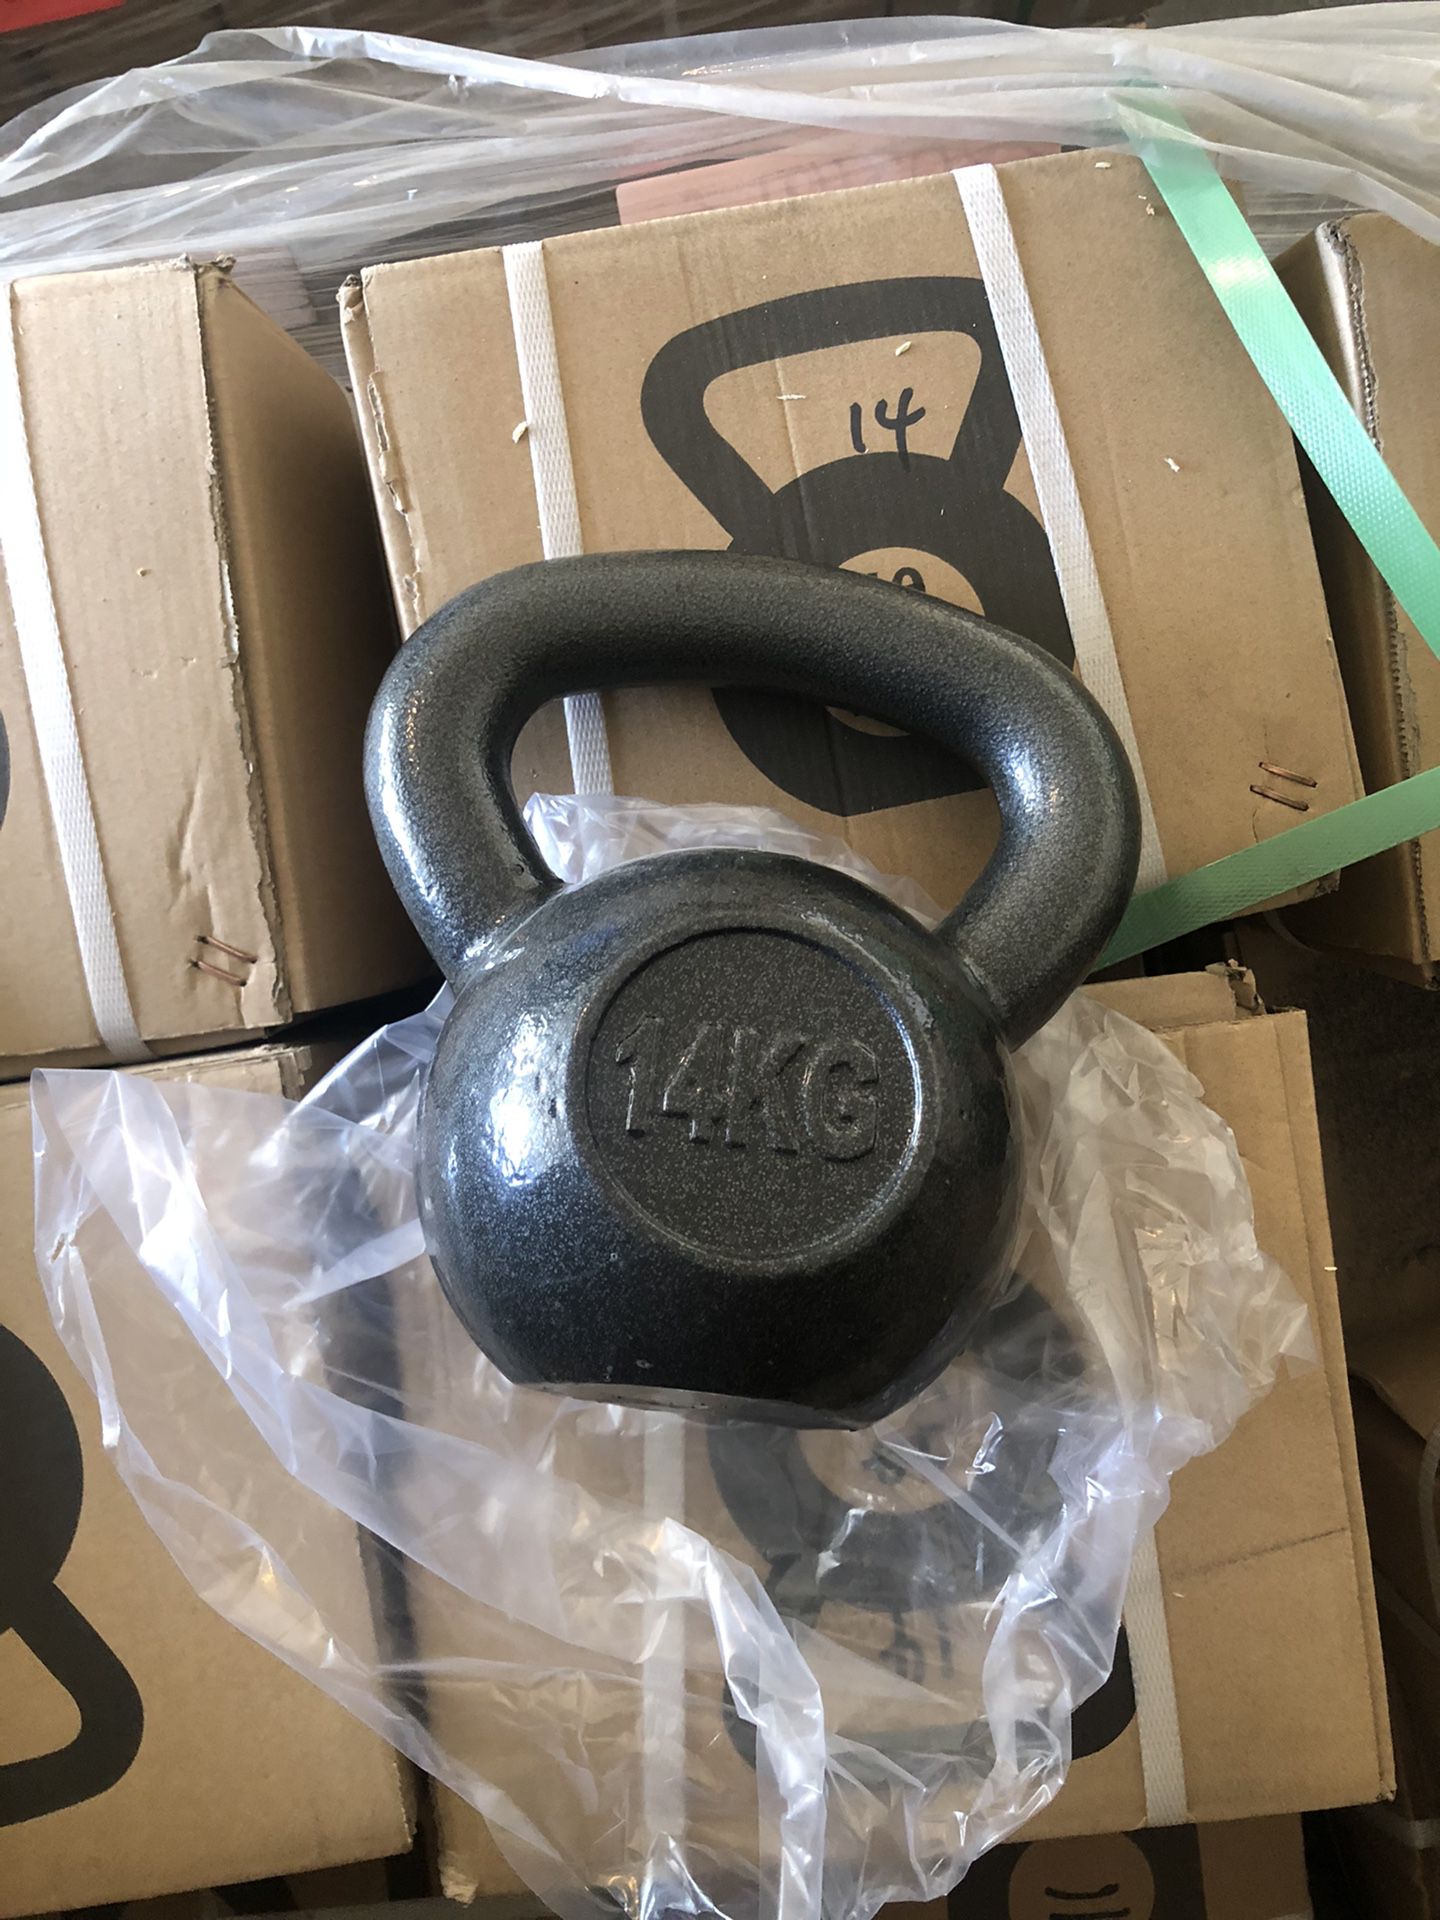 14kg 30lb Solid Steel Kettlebell Weight Home Gym Fitness Weights